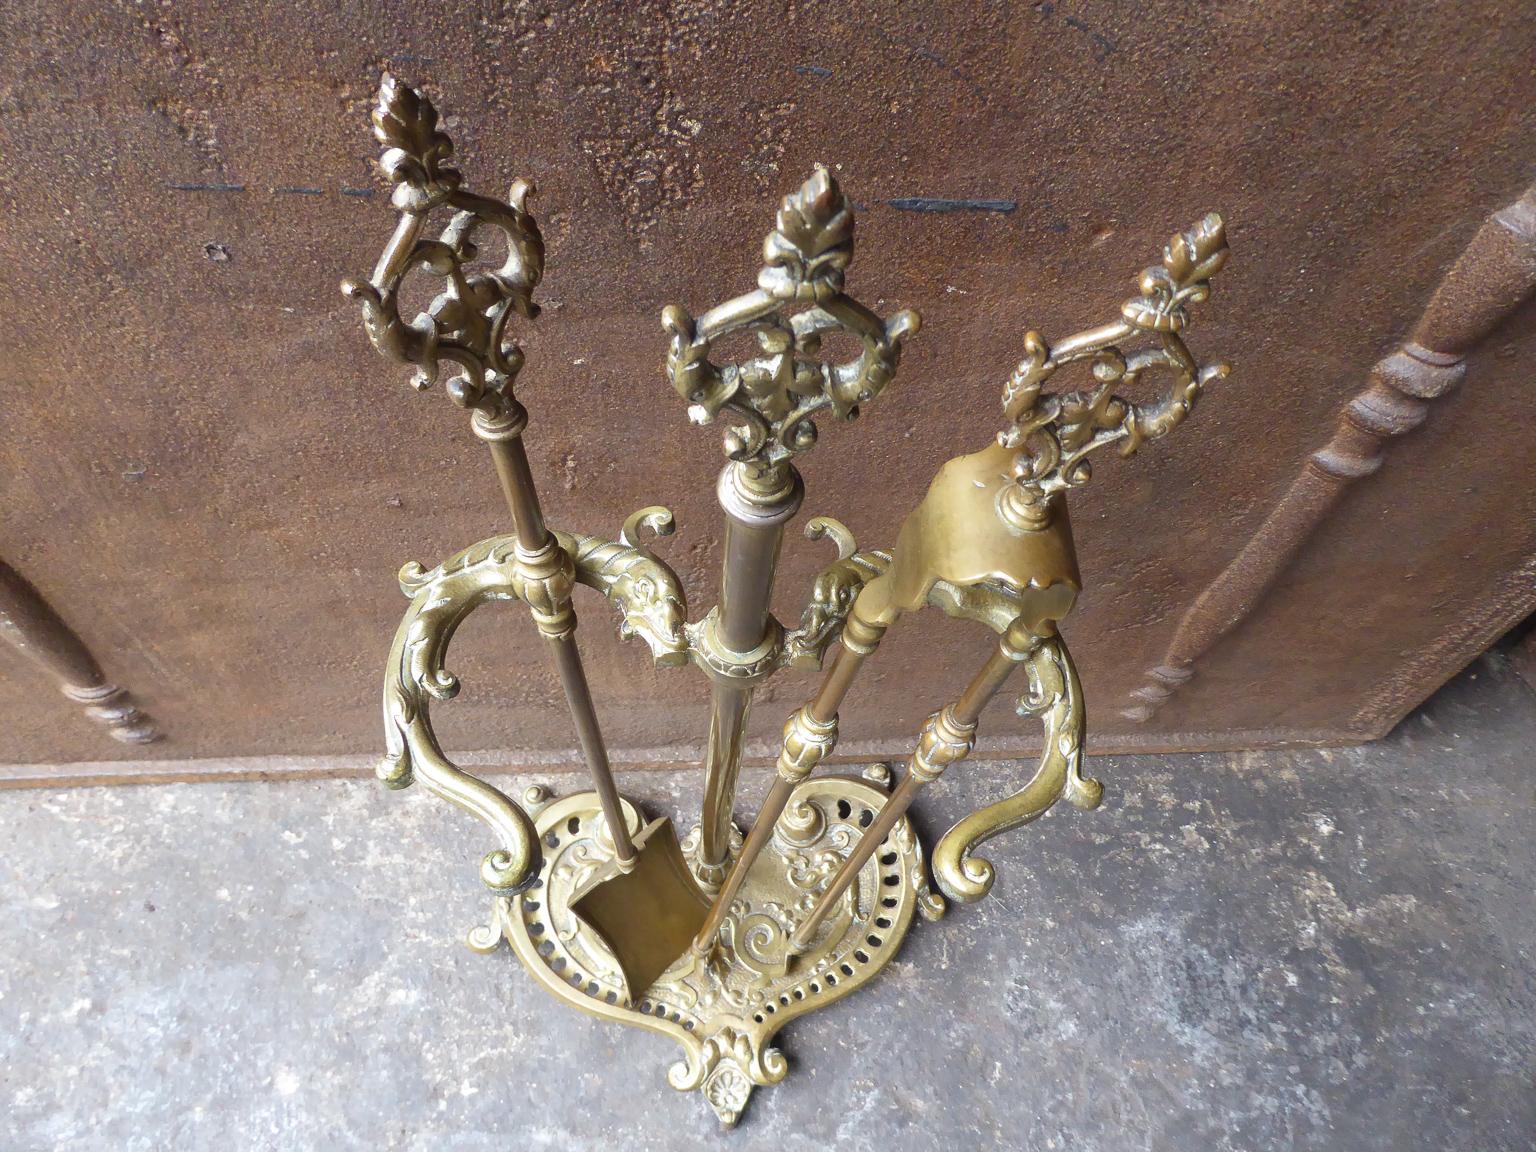 20th Century French Napoleon III Fireplace Tools or Fire Tools